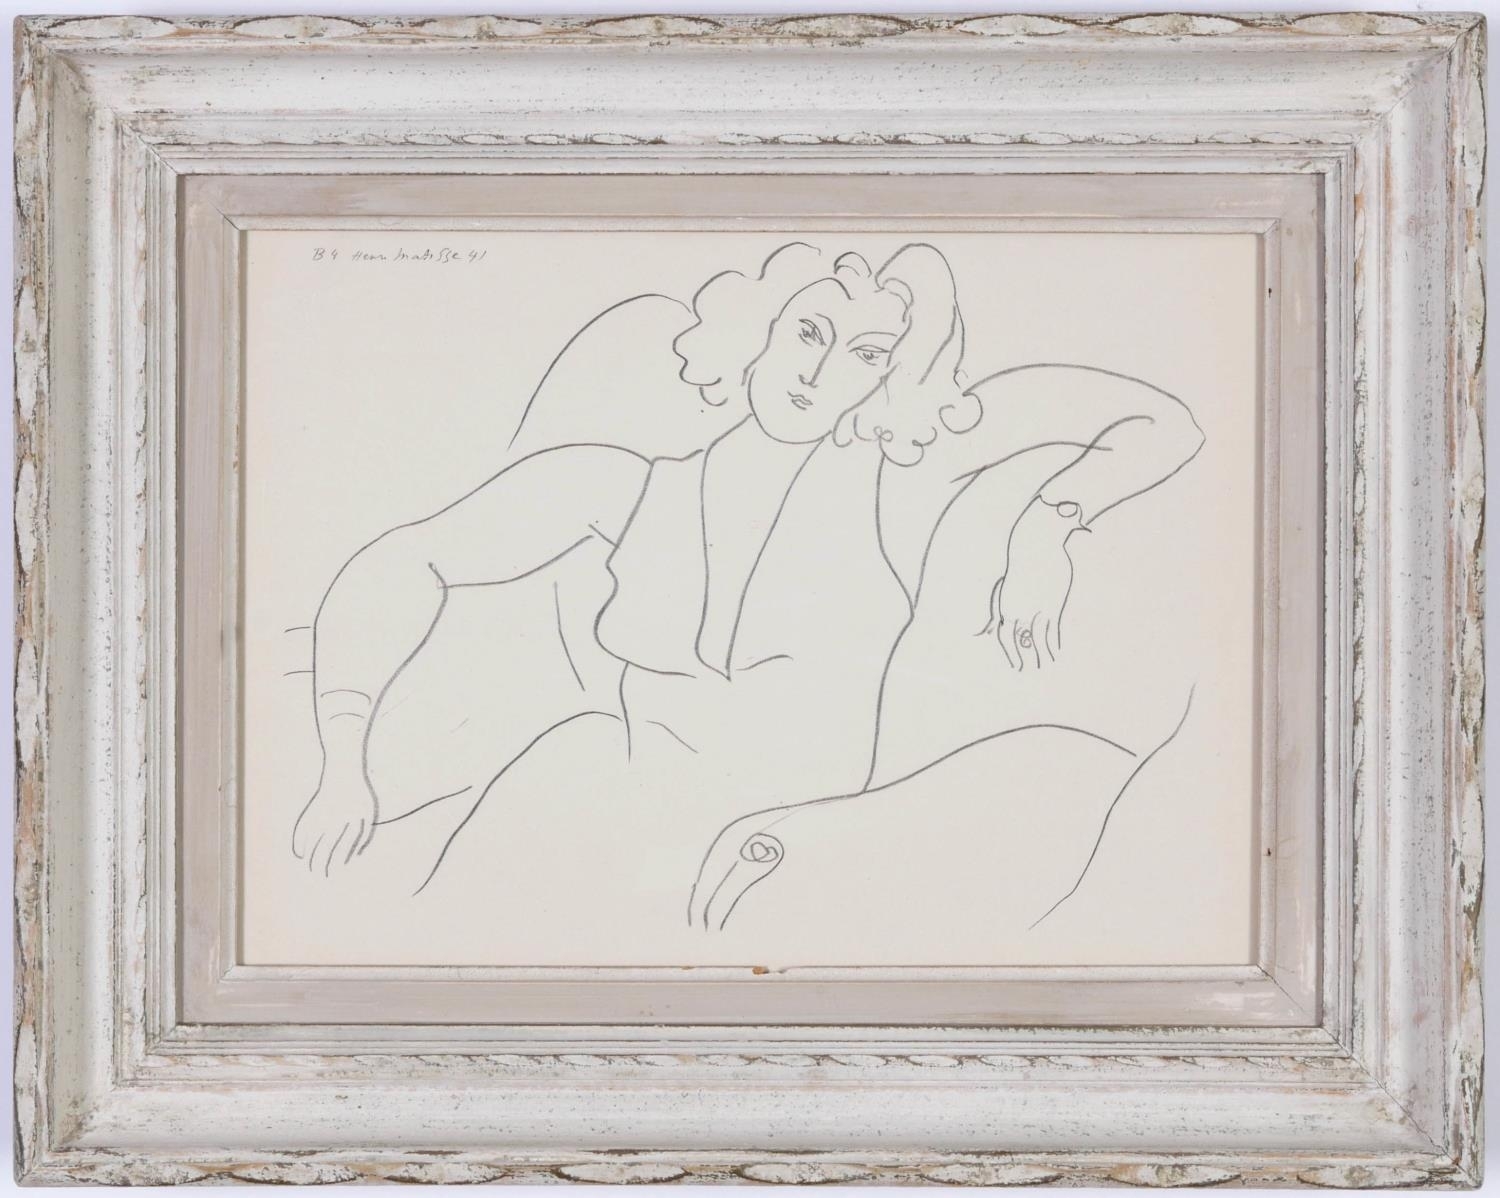 'Seated Woman B4' by Henri Matisse